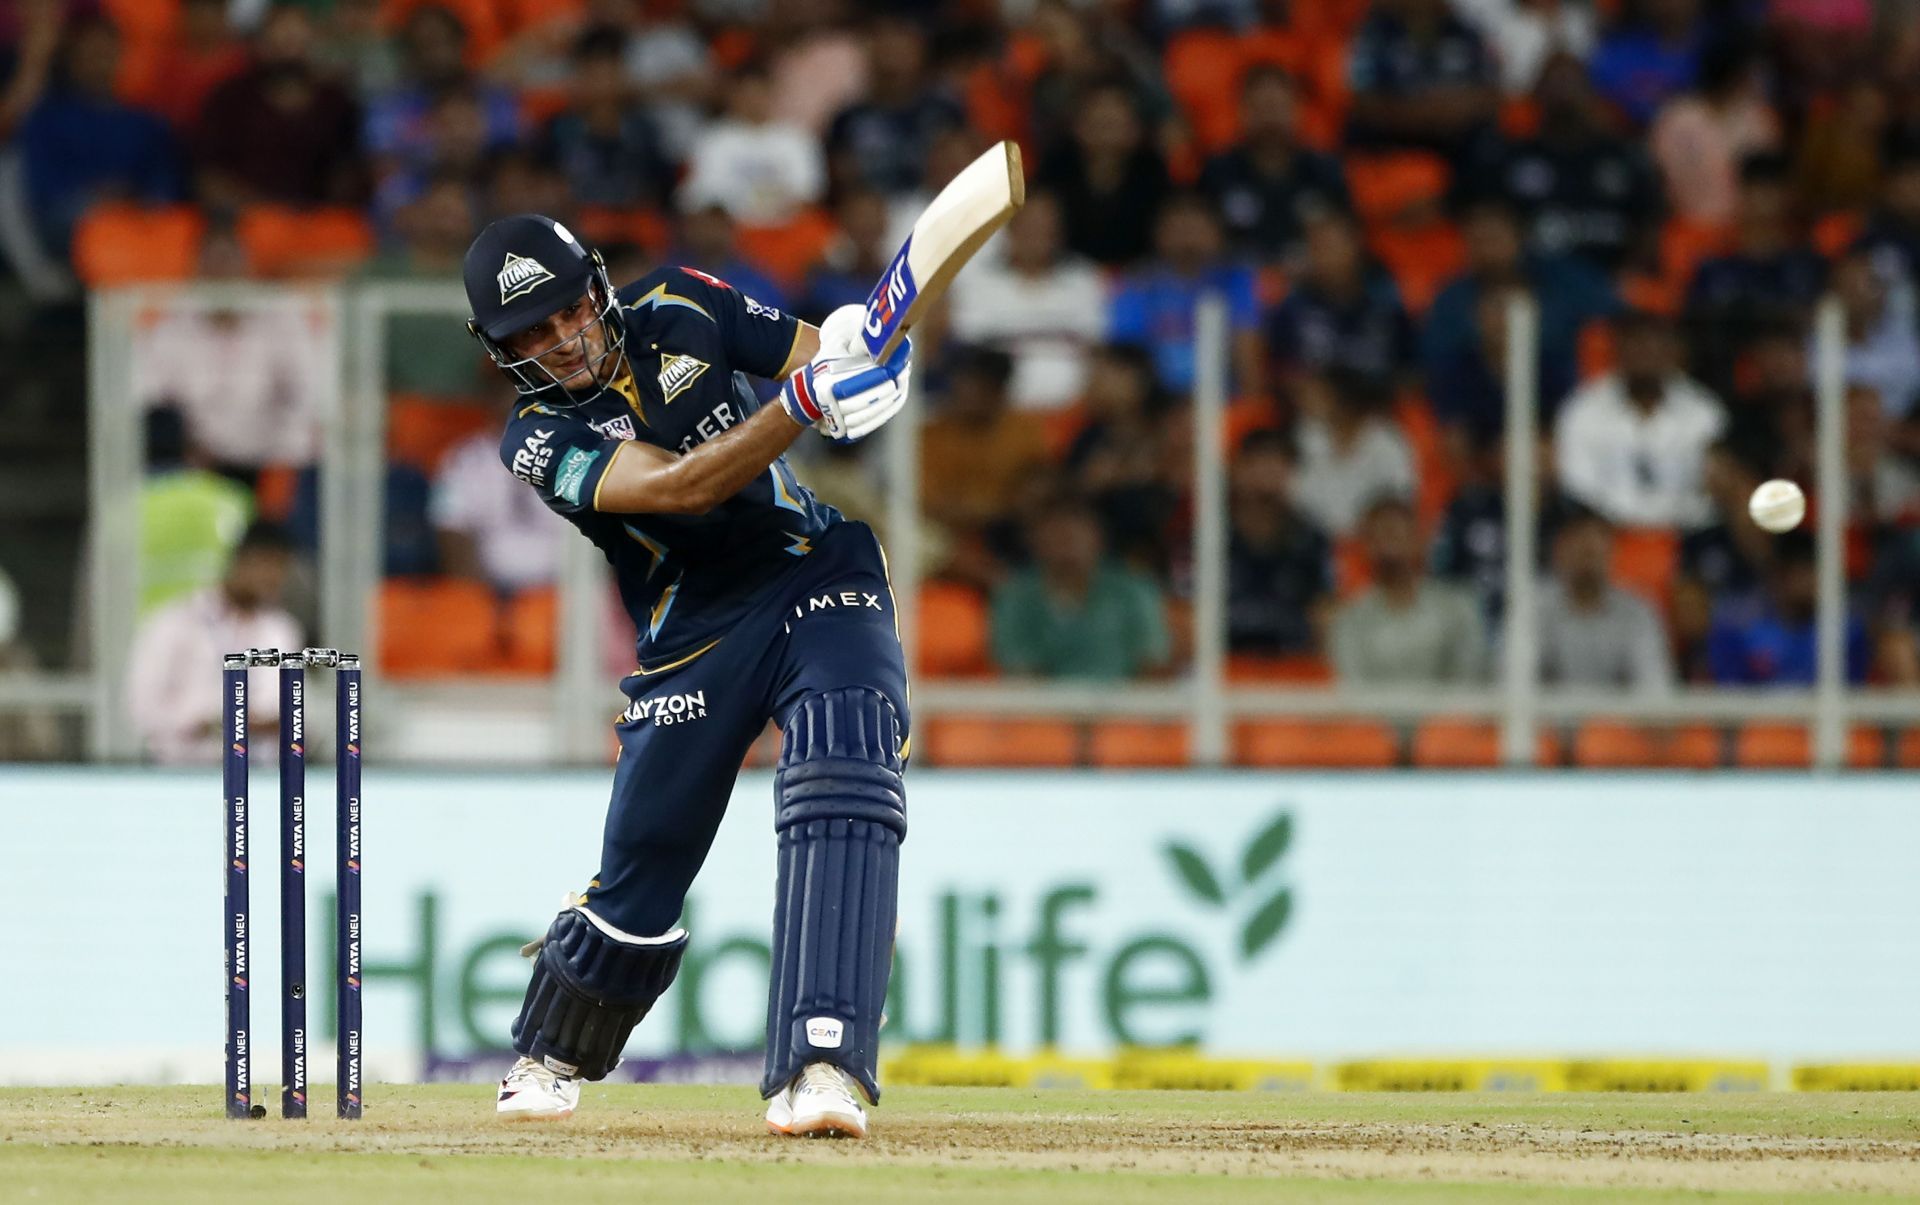 Gujarat Titans still have an outside chance of qualifying (Image: Getty)